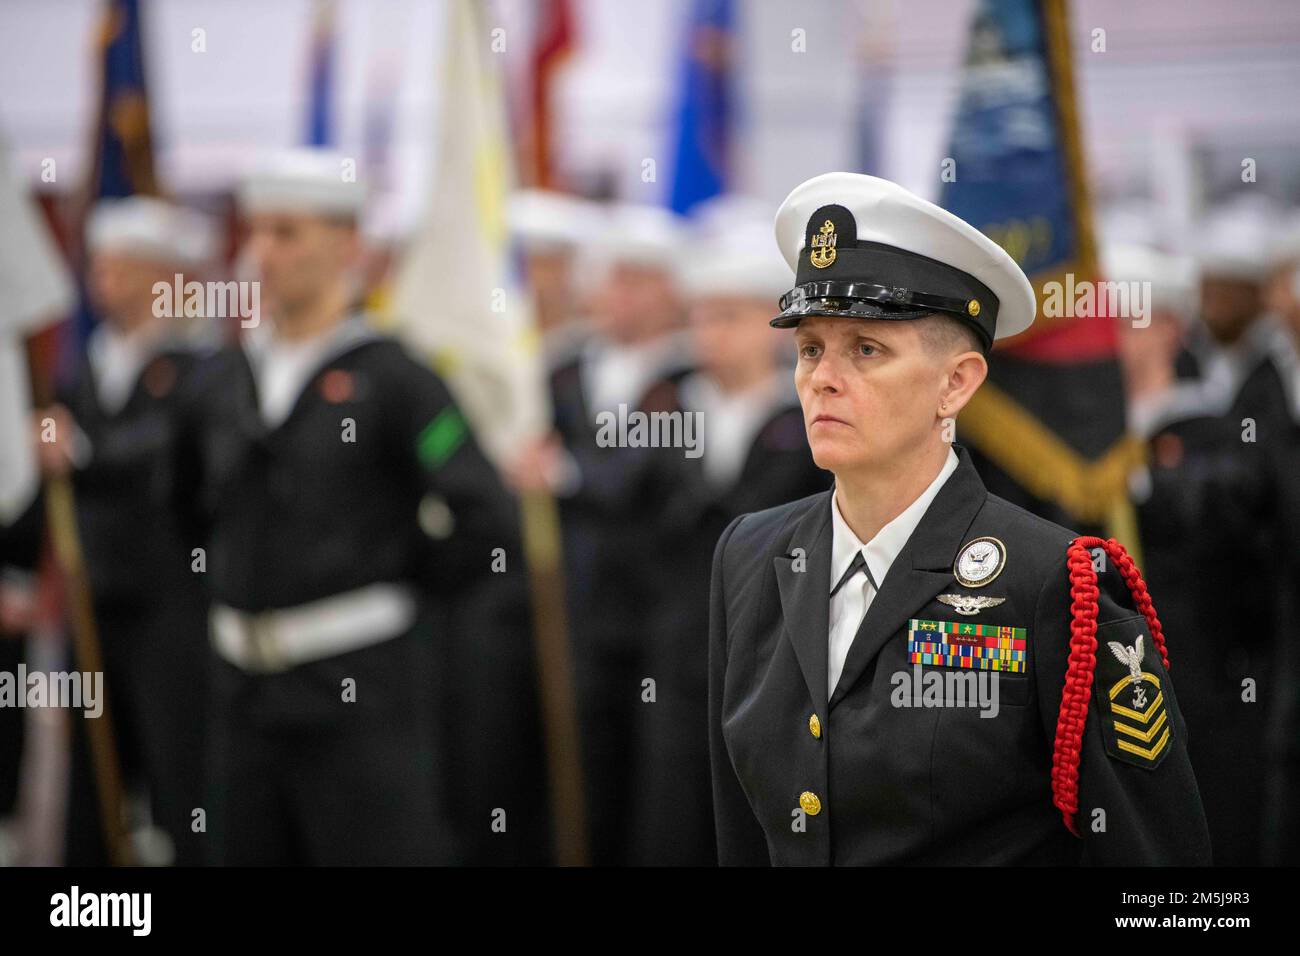 Chief Navy Counselor Kelly Ringaman, a recruit division commander, stands at parade rest inside Midway Drill Hall during a pass-in-review graduation ceremony at Recruit Training Command. More than 40,000 recruits train annually at the Navy's only boot camp. Stock Photo